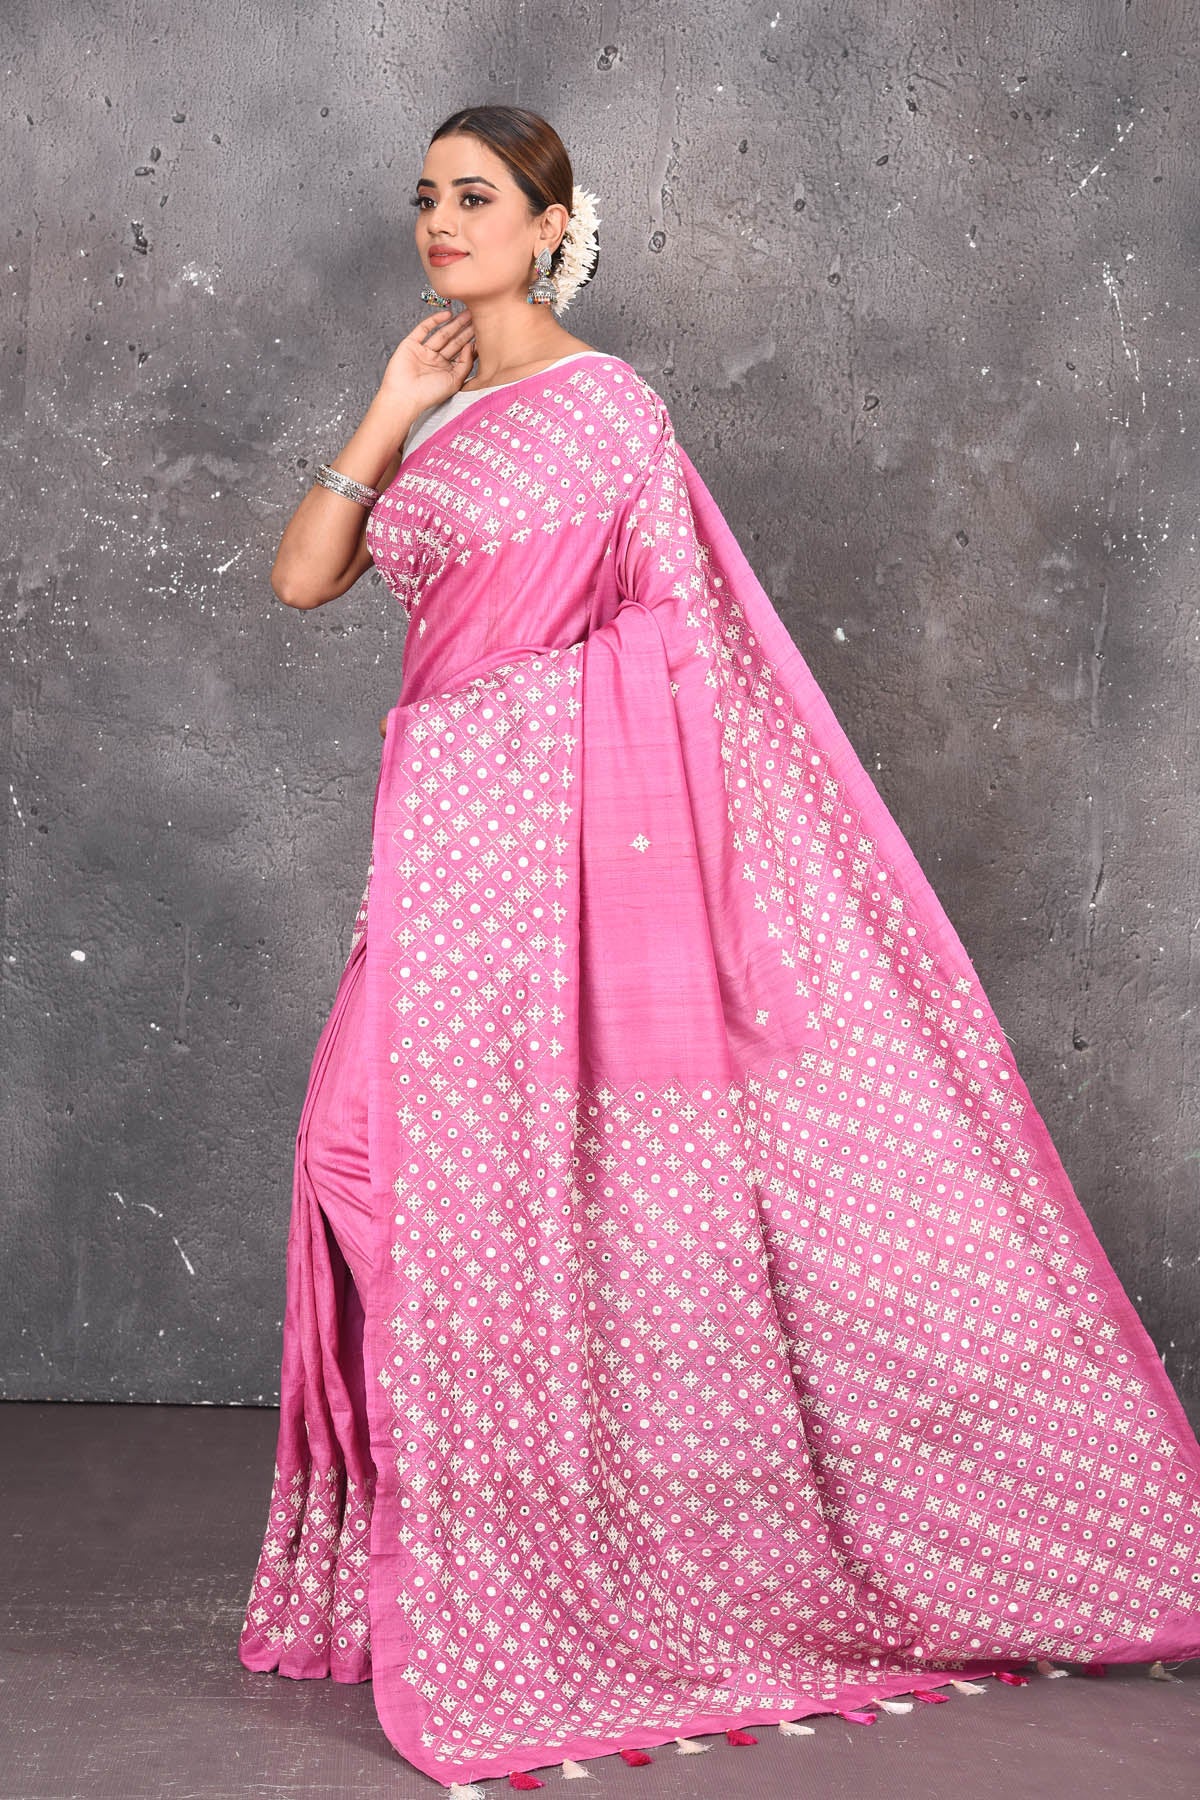 Shop elegant red zari woven pure tussar gicha silk saree in pink color with beautiful mirrorwork online in USA which has crafted by skilled weaver of Banaras with elegance and grace, this saree is definitely the epitome of beauty and a must have in your collection. Buy designer handwoven sarees from Pure Elegance which brings you our latest collection of Bhagalpuri handwoven tussar silk sarees.-Side view with open pallu.